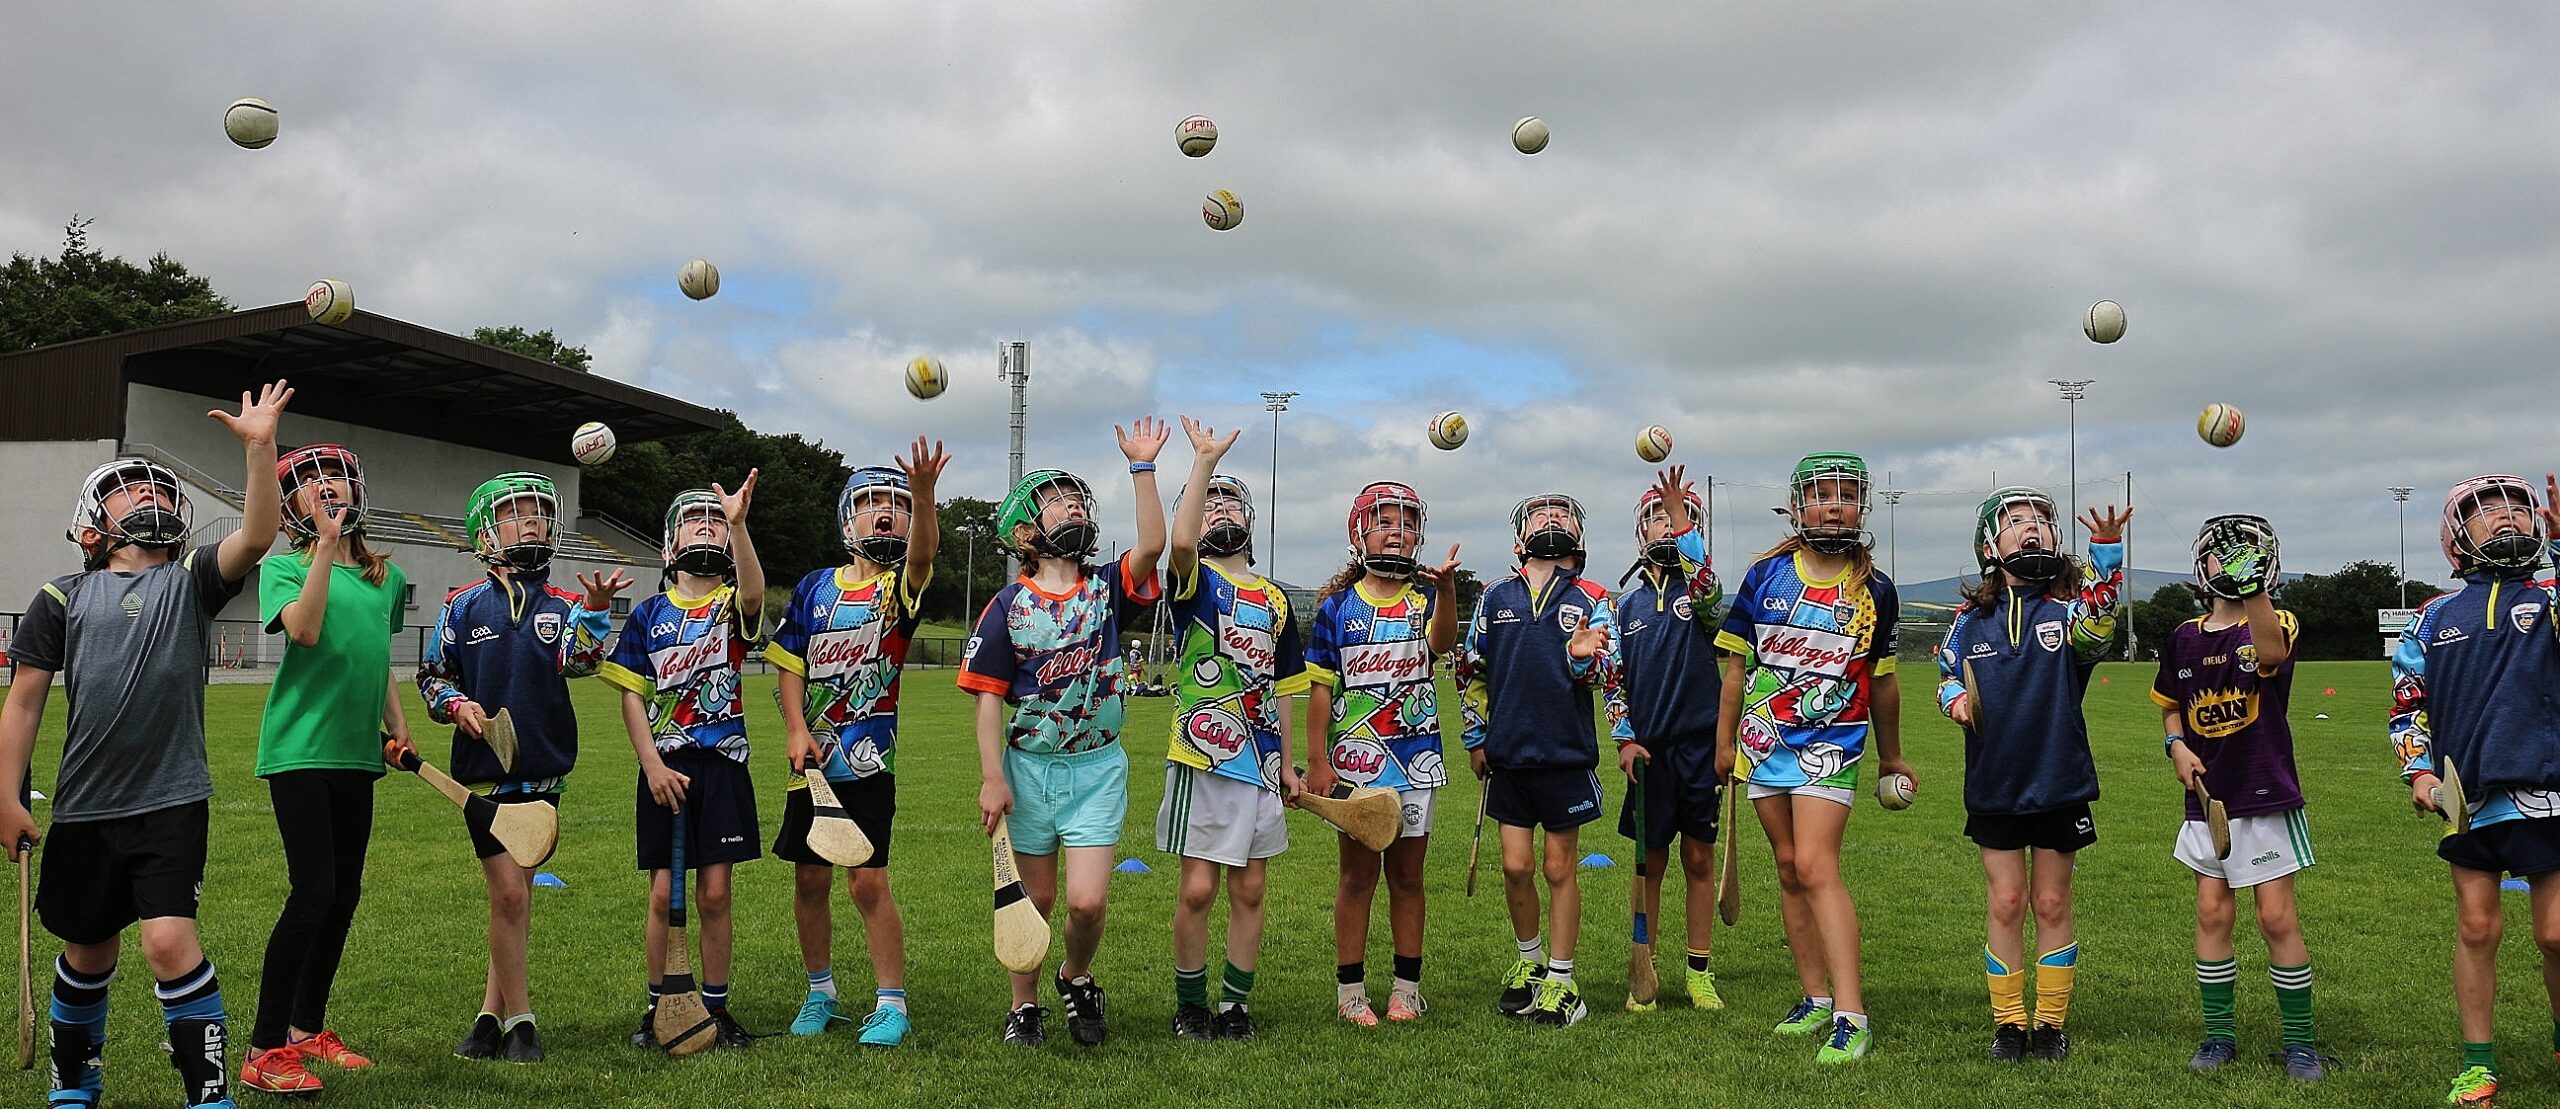 2022 Kellogg’s Cúl Camps back with a bang, Over 1,100 Kids enjoy the 1st of 8 weeks of a jam packed summer of GAA Fun